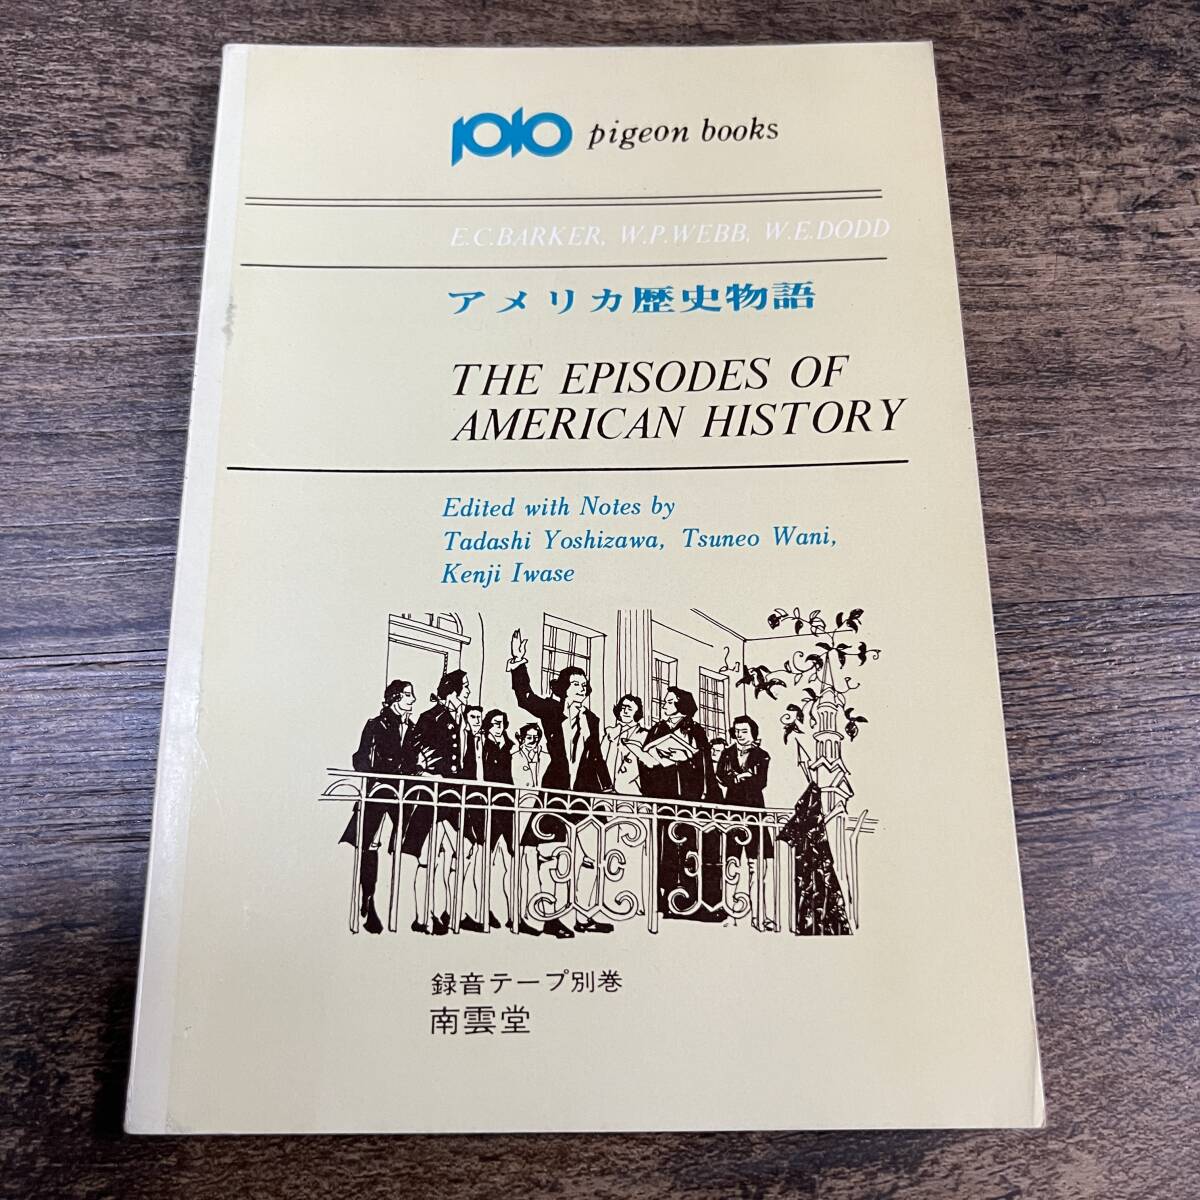 K-3431■アメリカ歴史物語 THE EPISODES OF AMERICAN HISTORY（pigeon books）■英文法 英語学■南雲堂■1967年7月15日 増刷_画像1